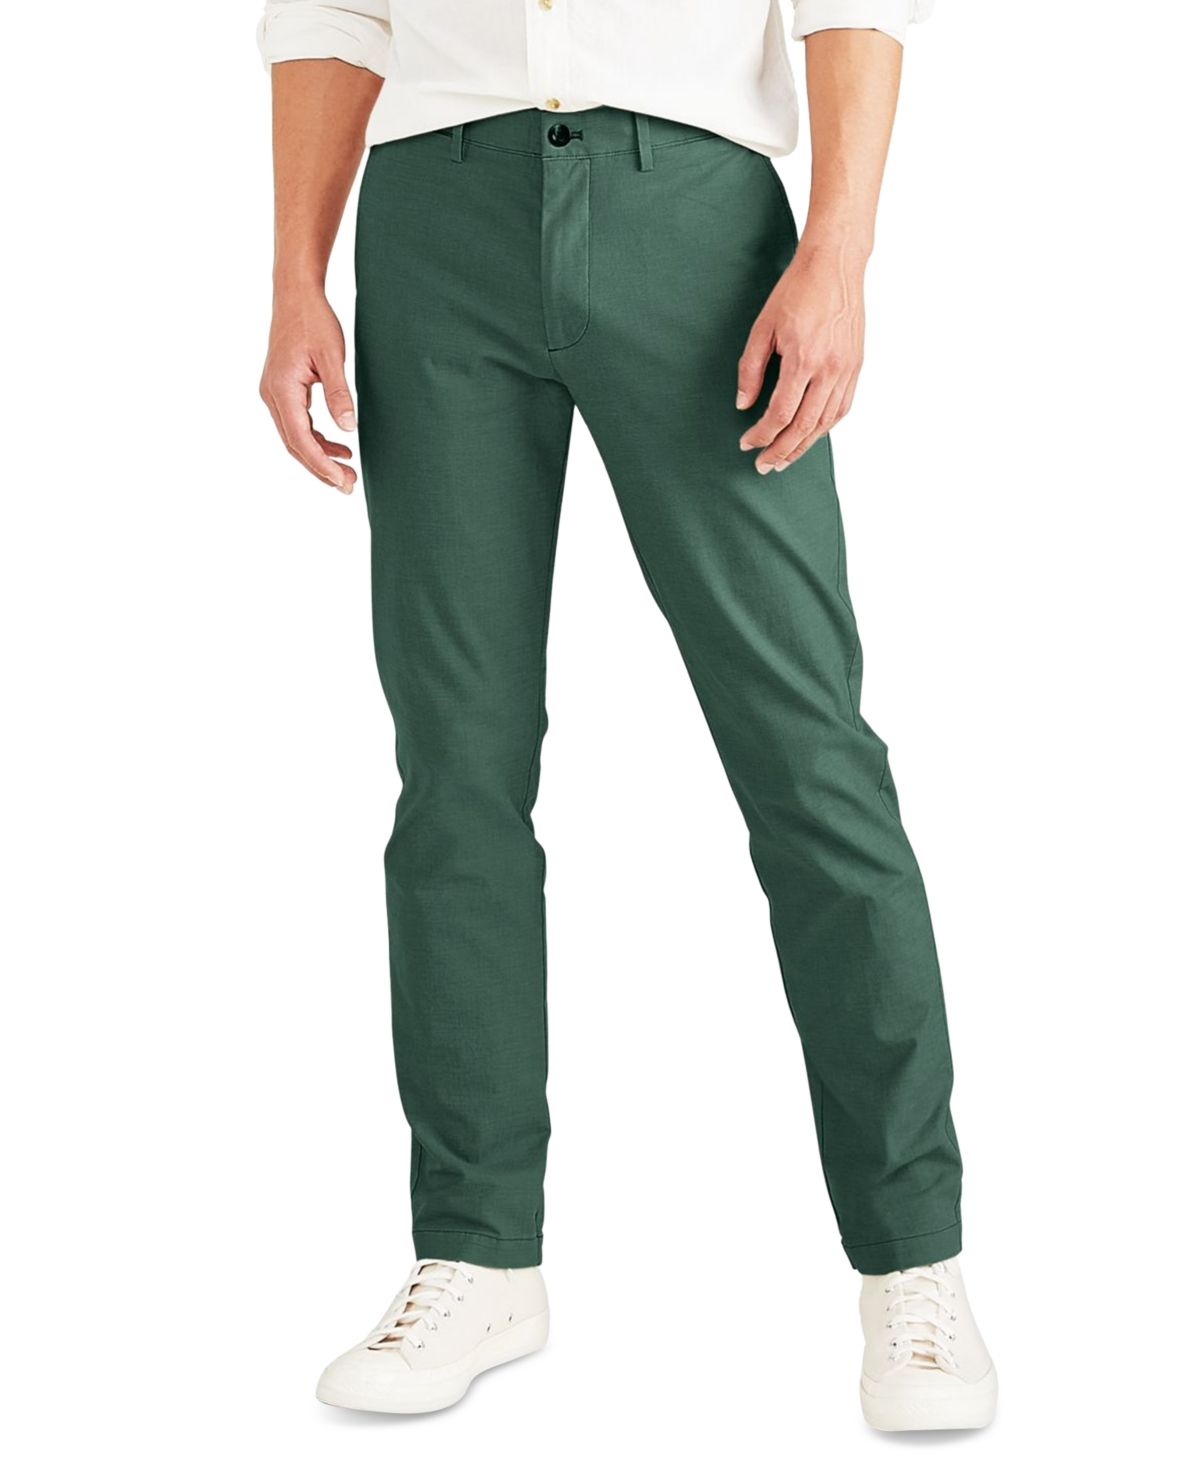 20 Best Khaki Pants for Men 2023, Tested by Style Editors